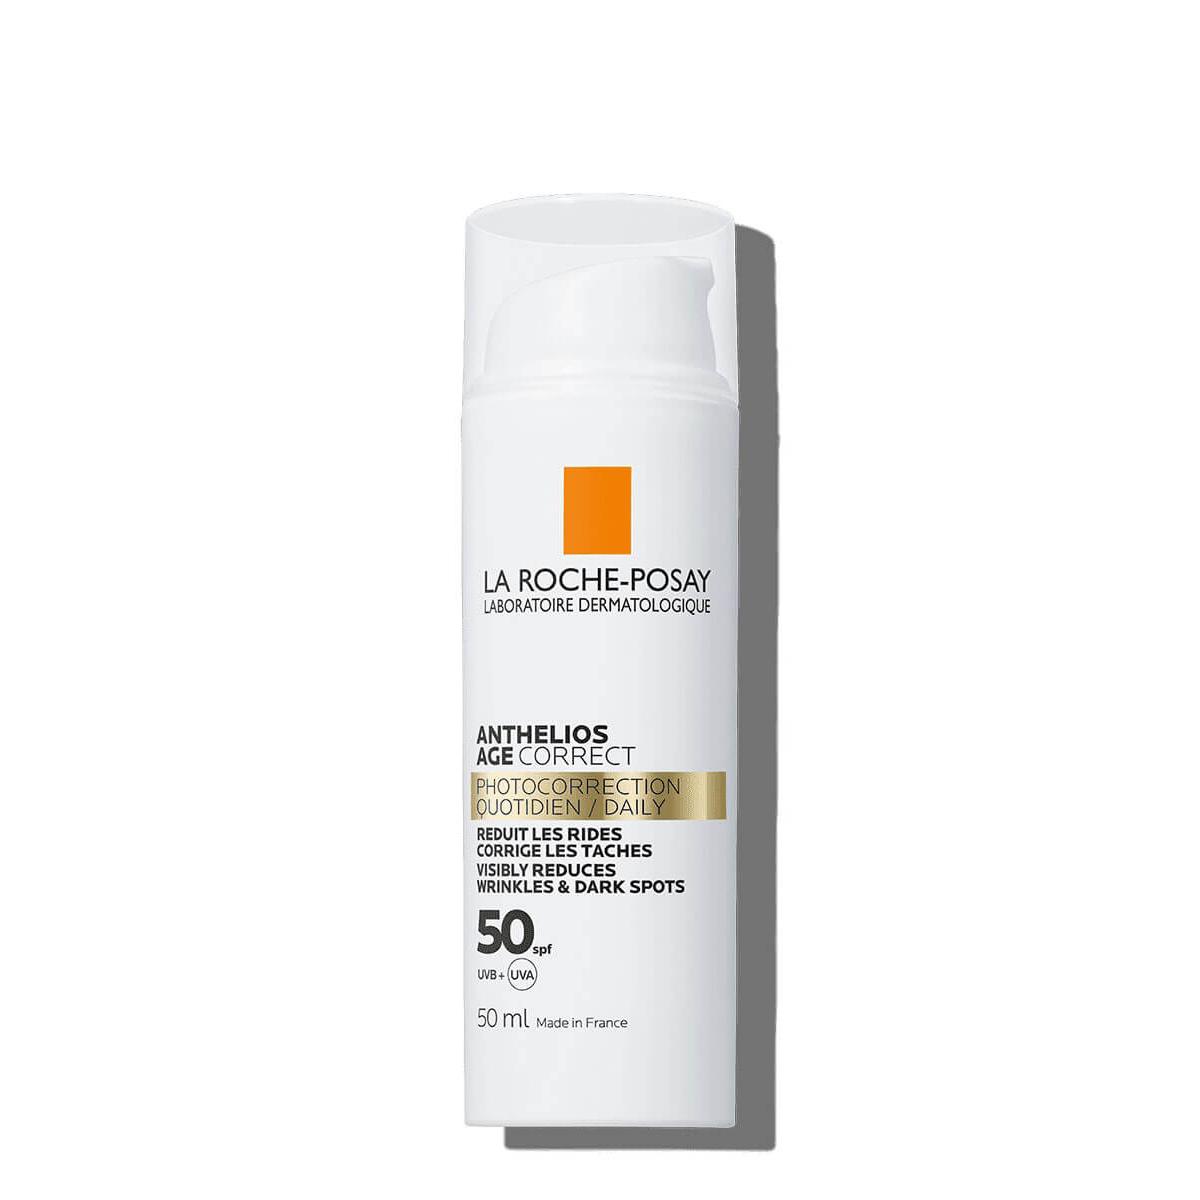 Anthelios - La roche posay anthelios age correct fotoprotector sin color spf50 50ml